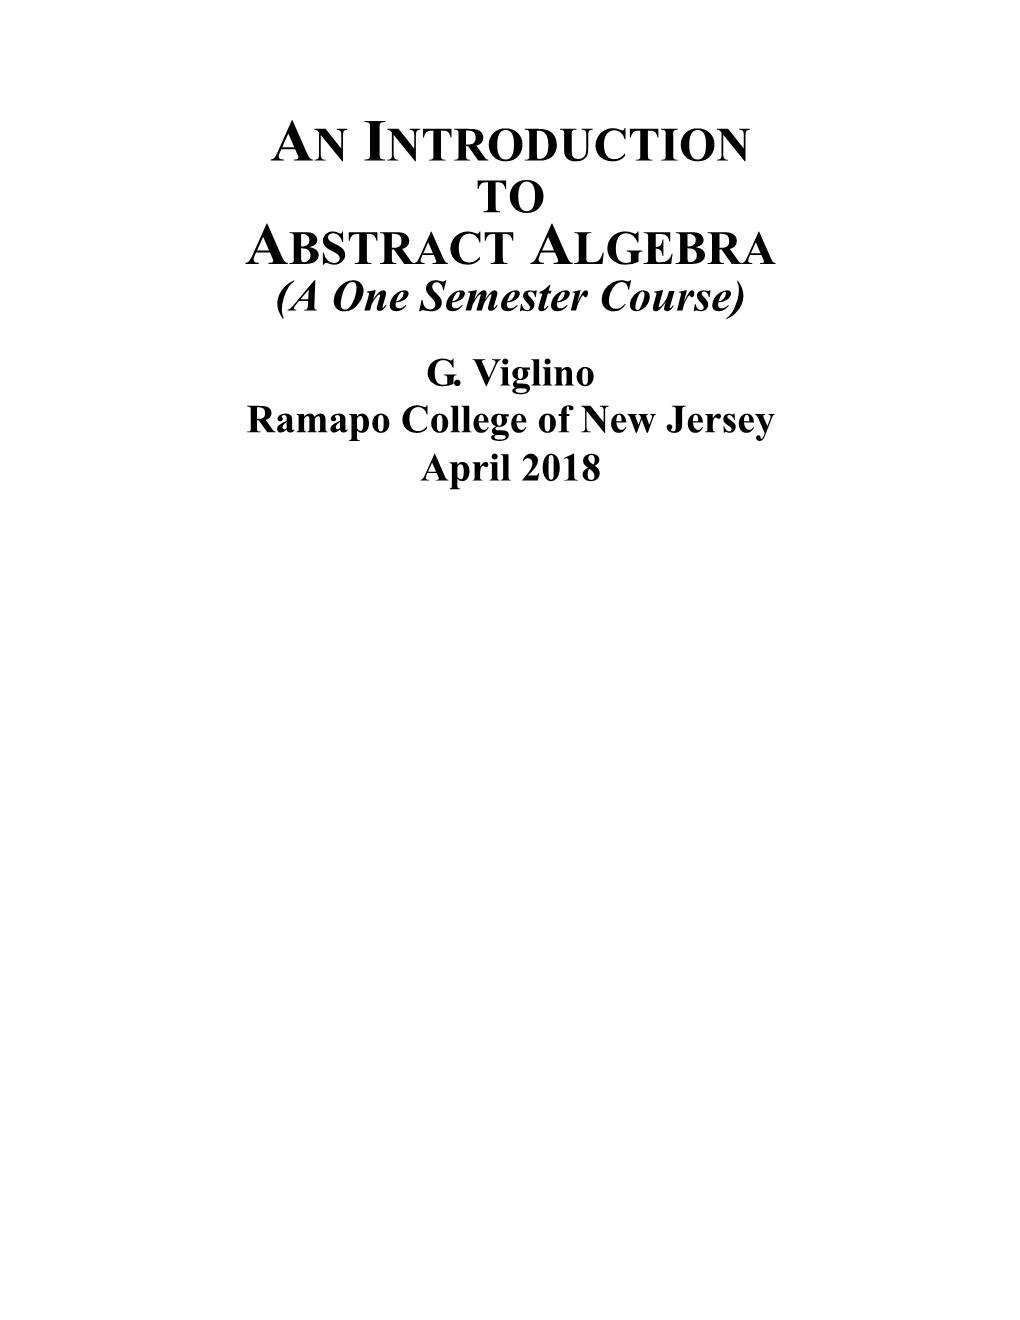 AN INTRODUCTION to ABSTRACT ALGEBRA (A One Semester Course)